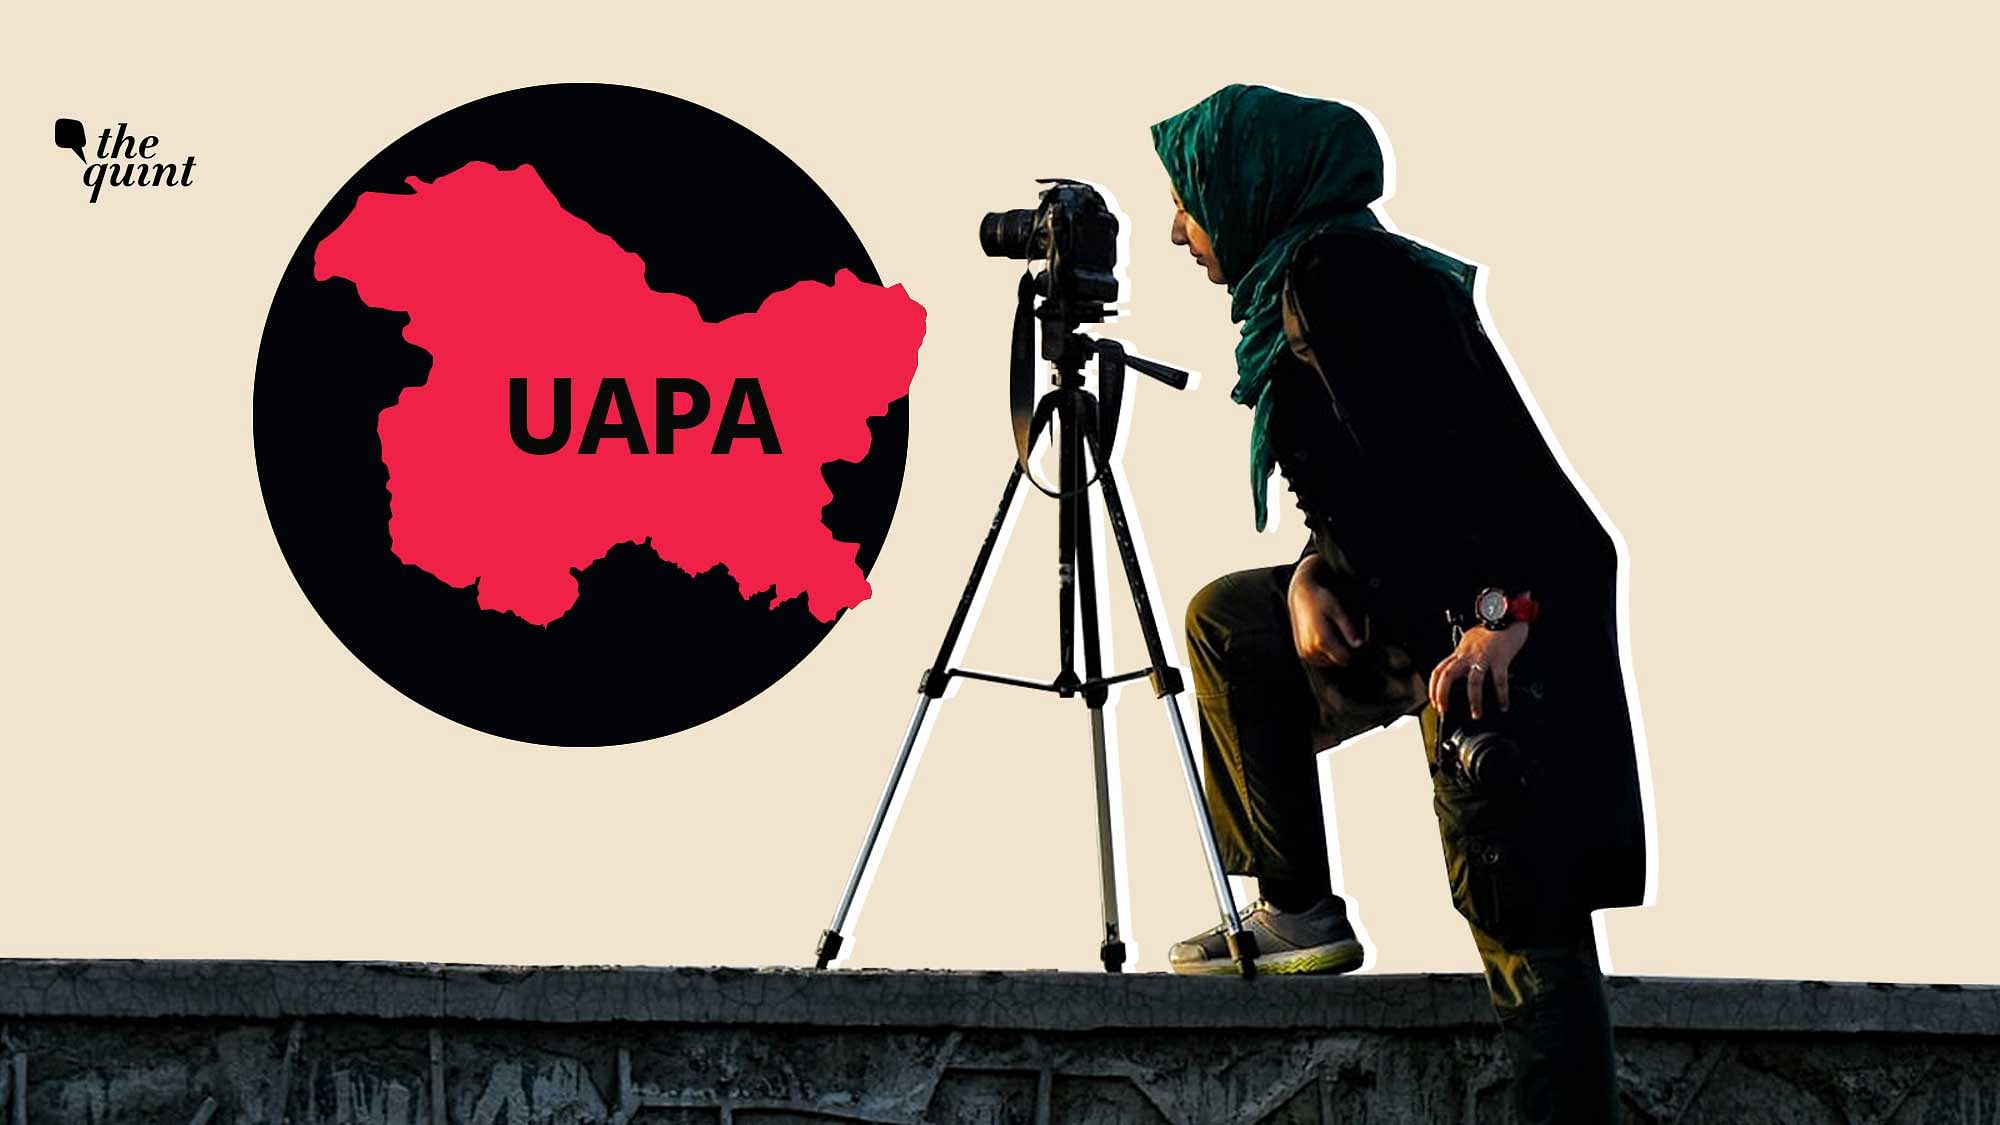 Photojournalist Masrat Zahra was booked under UAPA for an alleged “anti-national” post on social media.